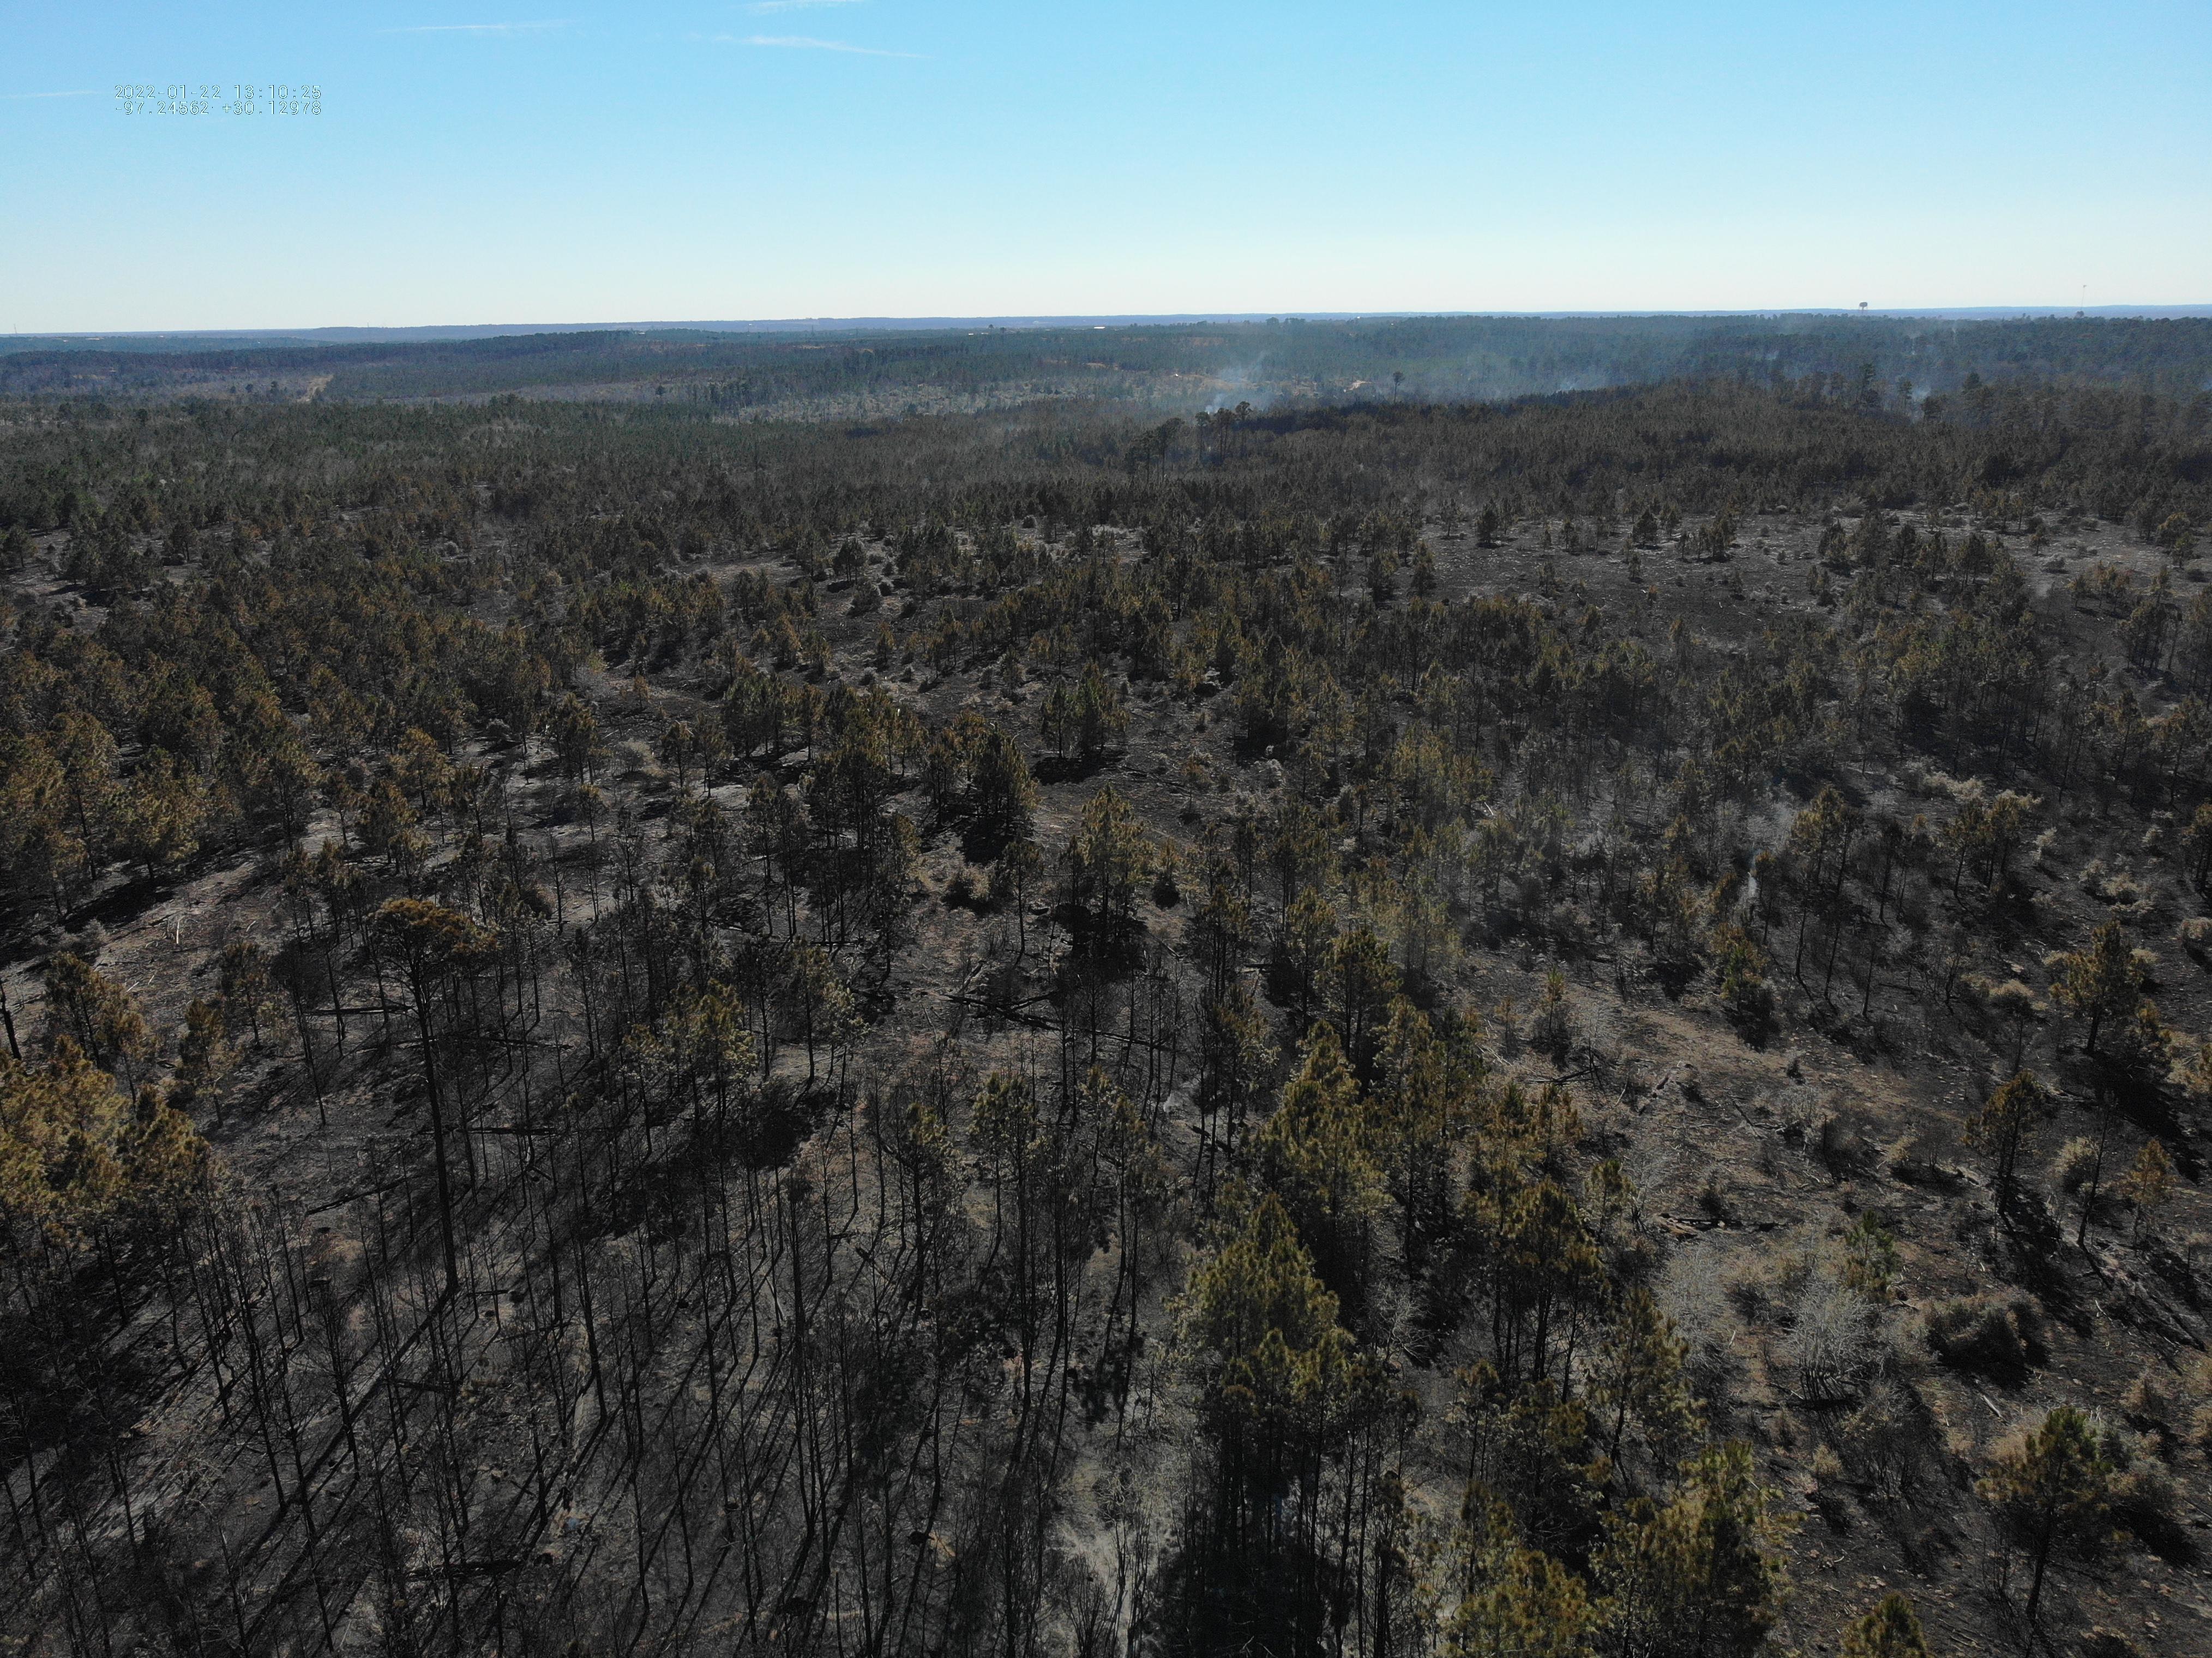 A drone shot of the burned area from the Rolling Pines Fire that shows some burned out fires and allowed others to survive and create a patchwork of different intensities